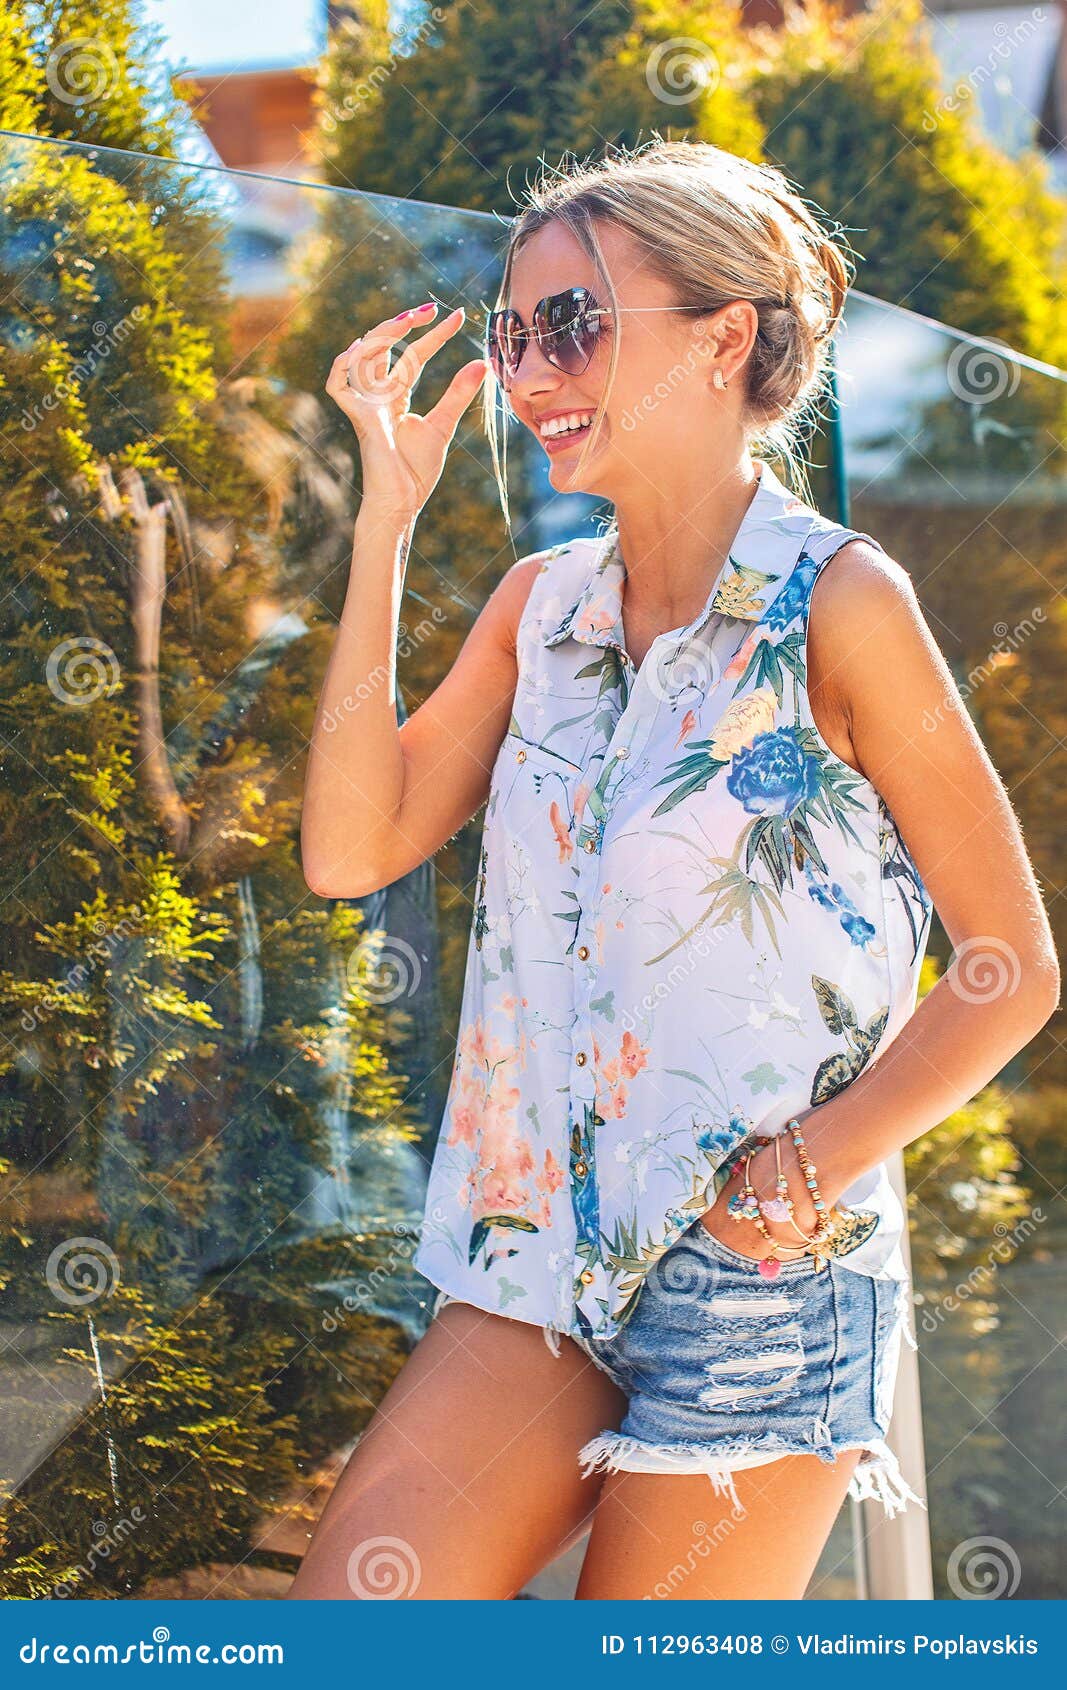 Slim Blond Woman In Jeans Shorts Posing Stock Photo Image Of Nature